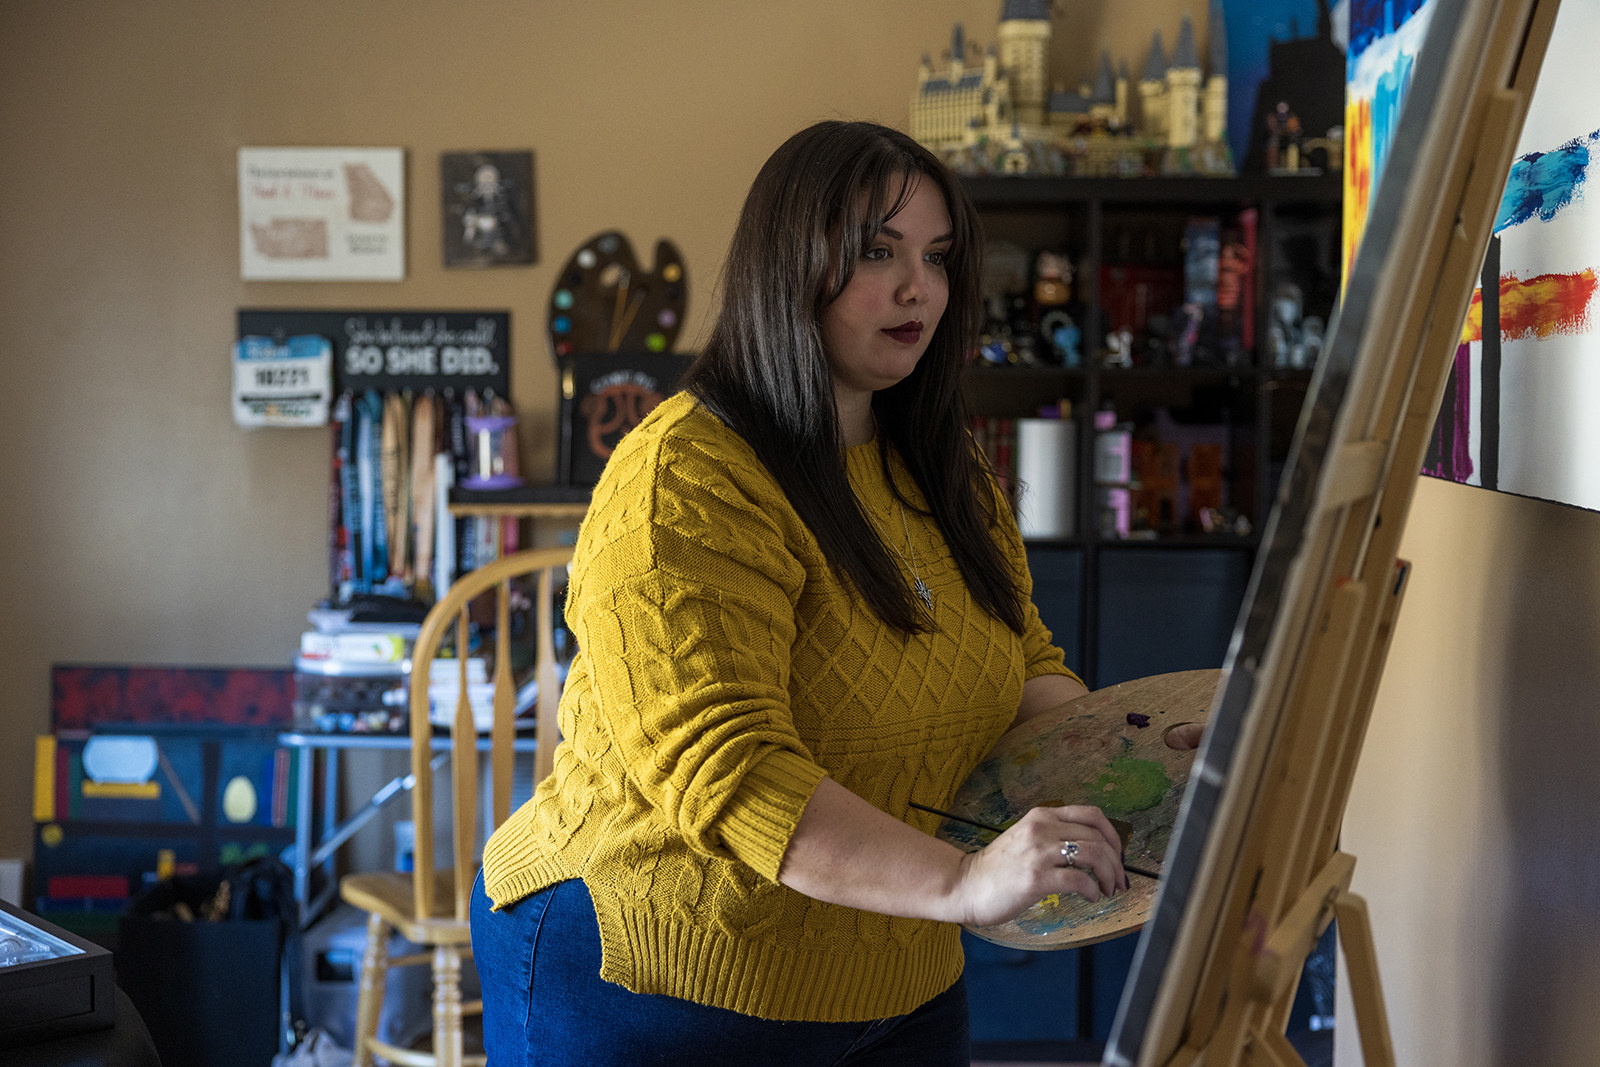 A woman wears a yellow knit sweater and stands with a palette for paint and paintbrush at an easel